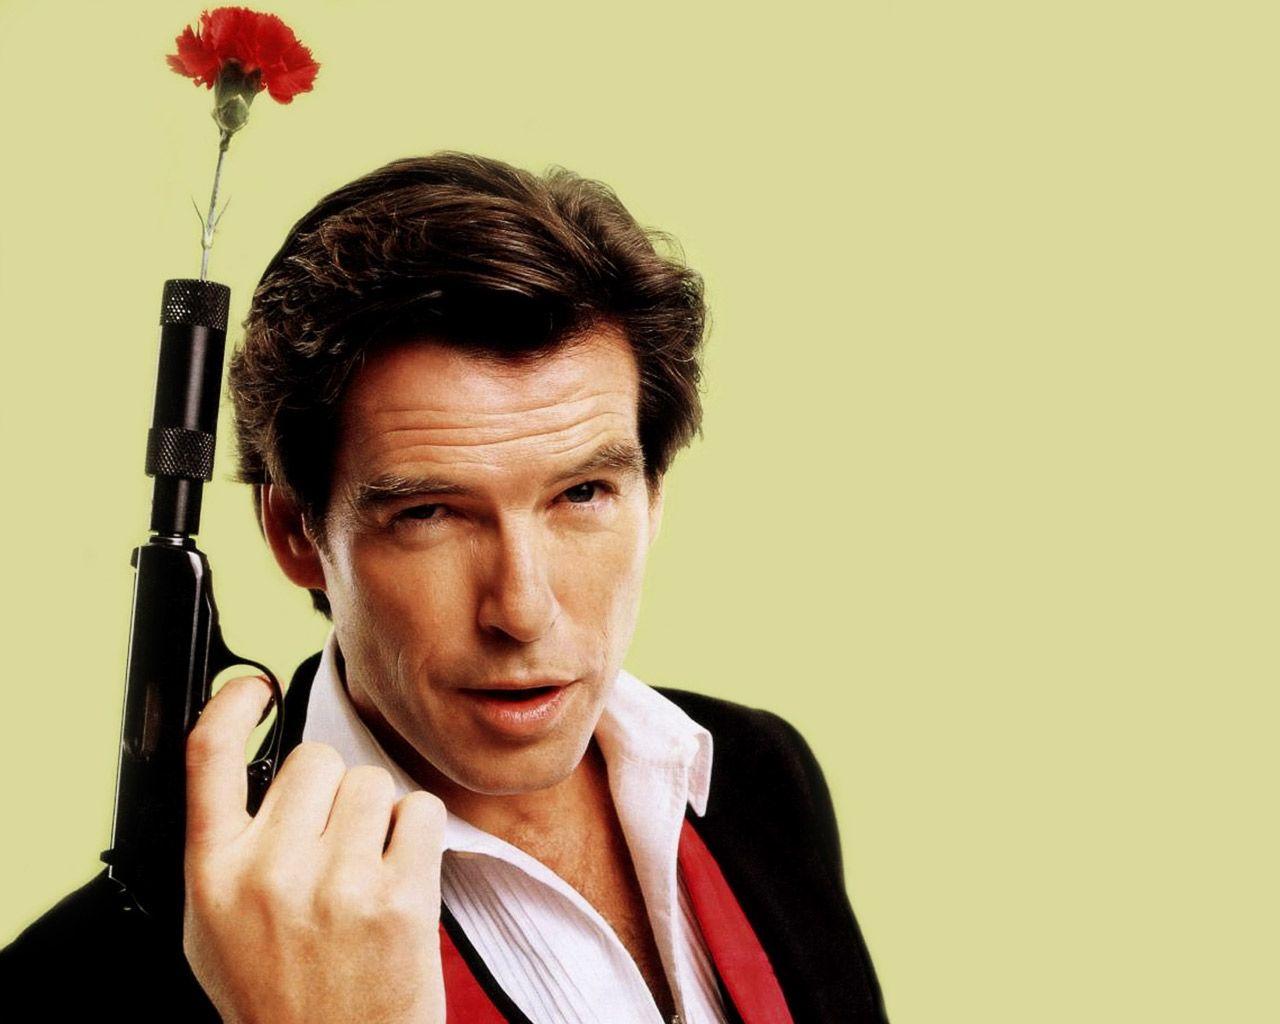 Pierce Brosnan. Oh you adorable thing!